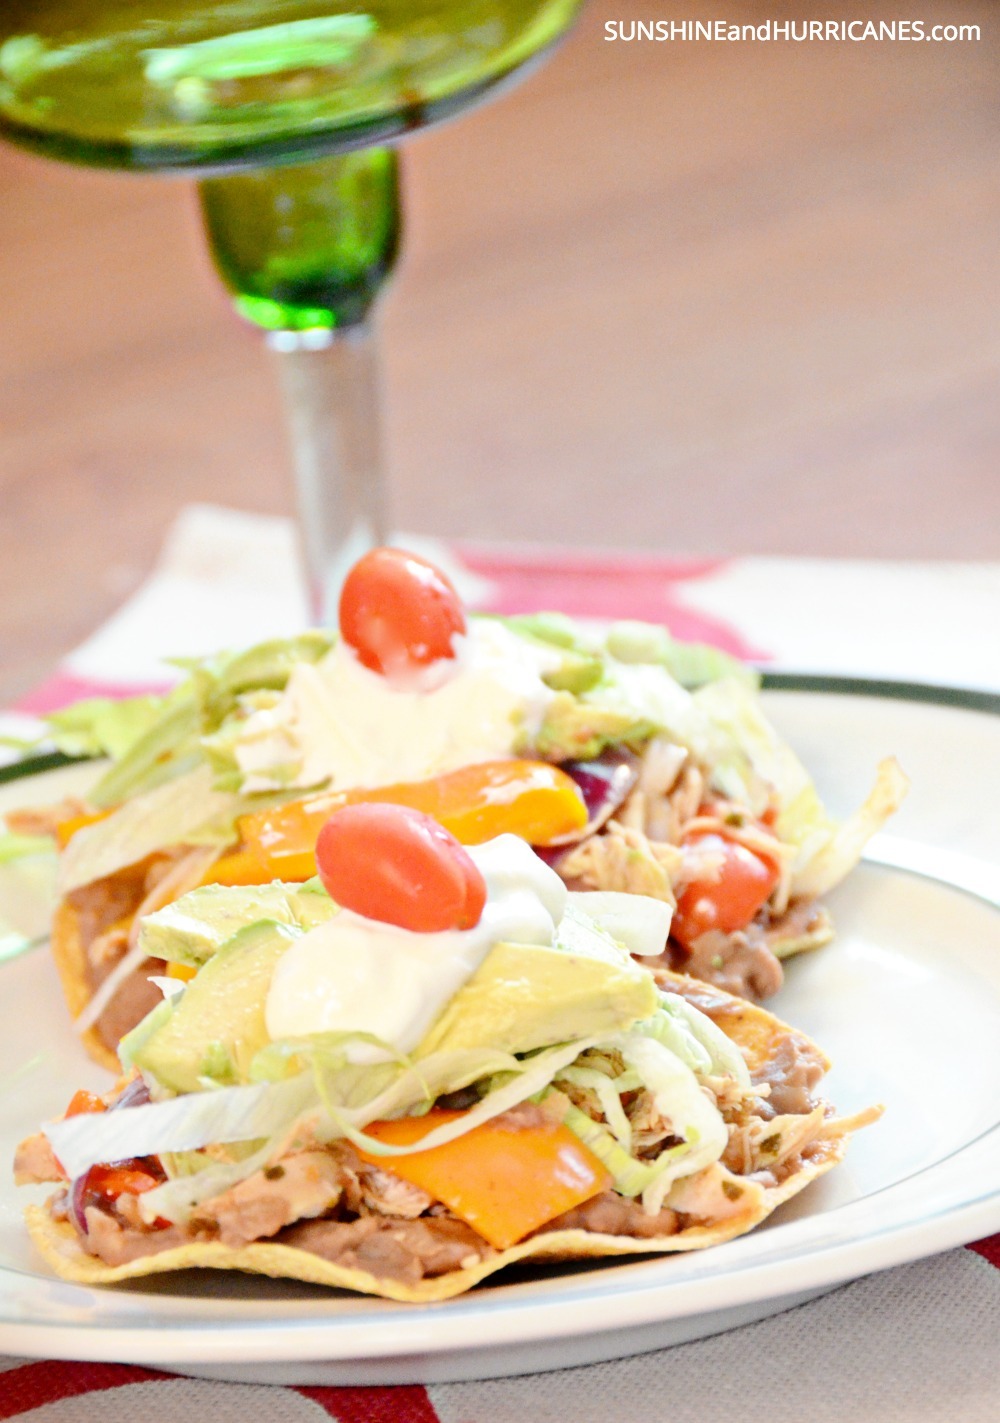 Looking for a super easy weeknight meal that the whole family will rave about? These slow cooker chicken tostados only require a few ingredients and come together for a quick meal  that will win over even the pickiest eaters. Slow Cooker Chicken Tostados. SunshineandHurricanes.com